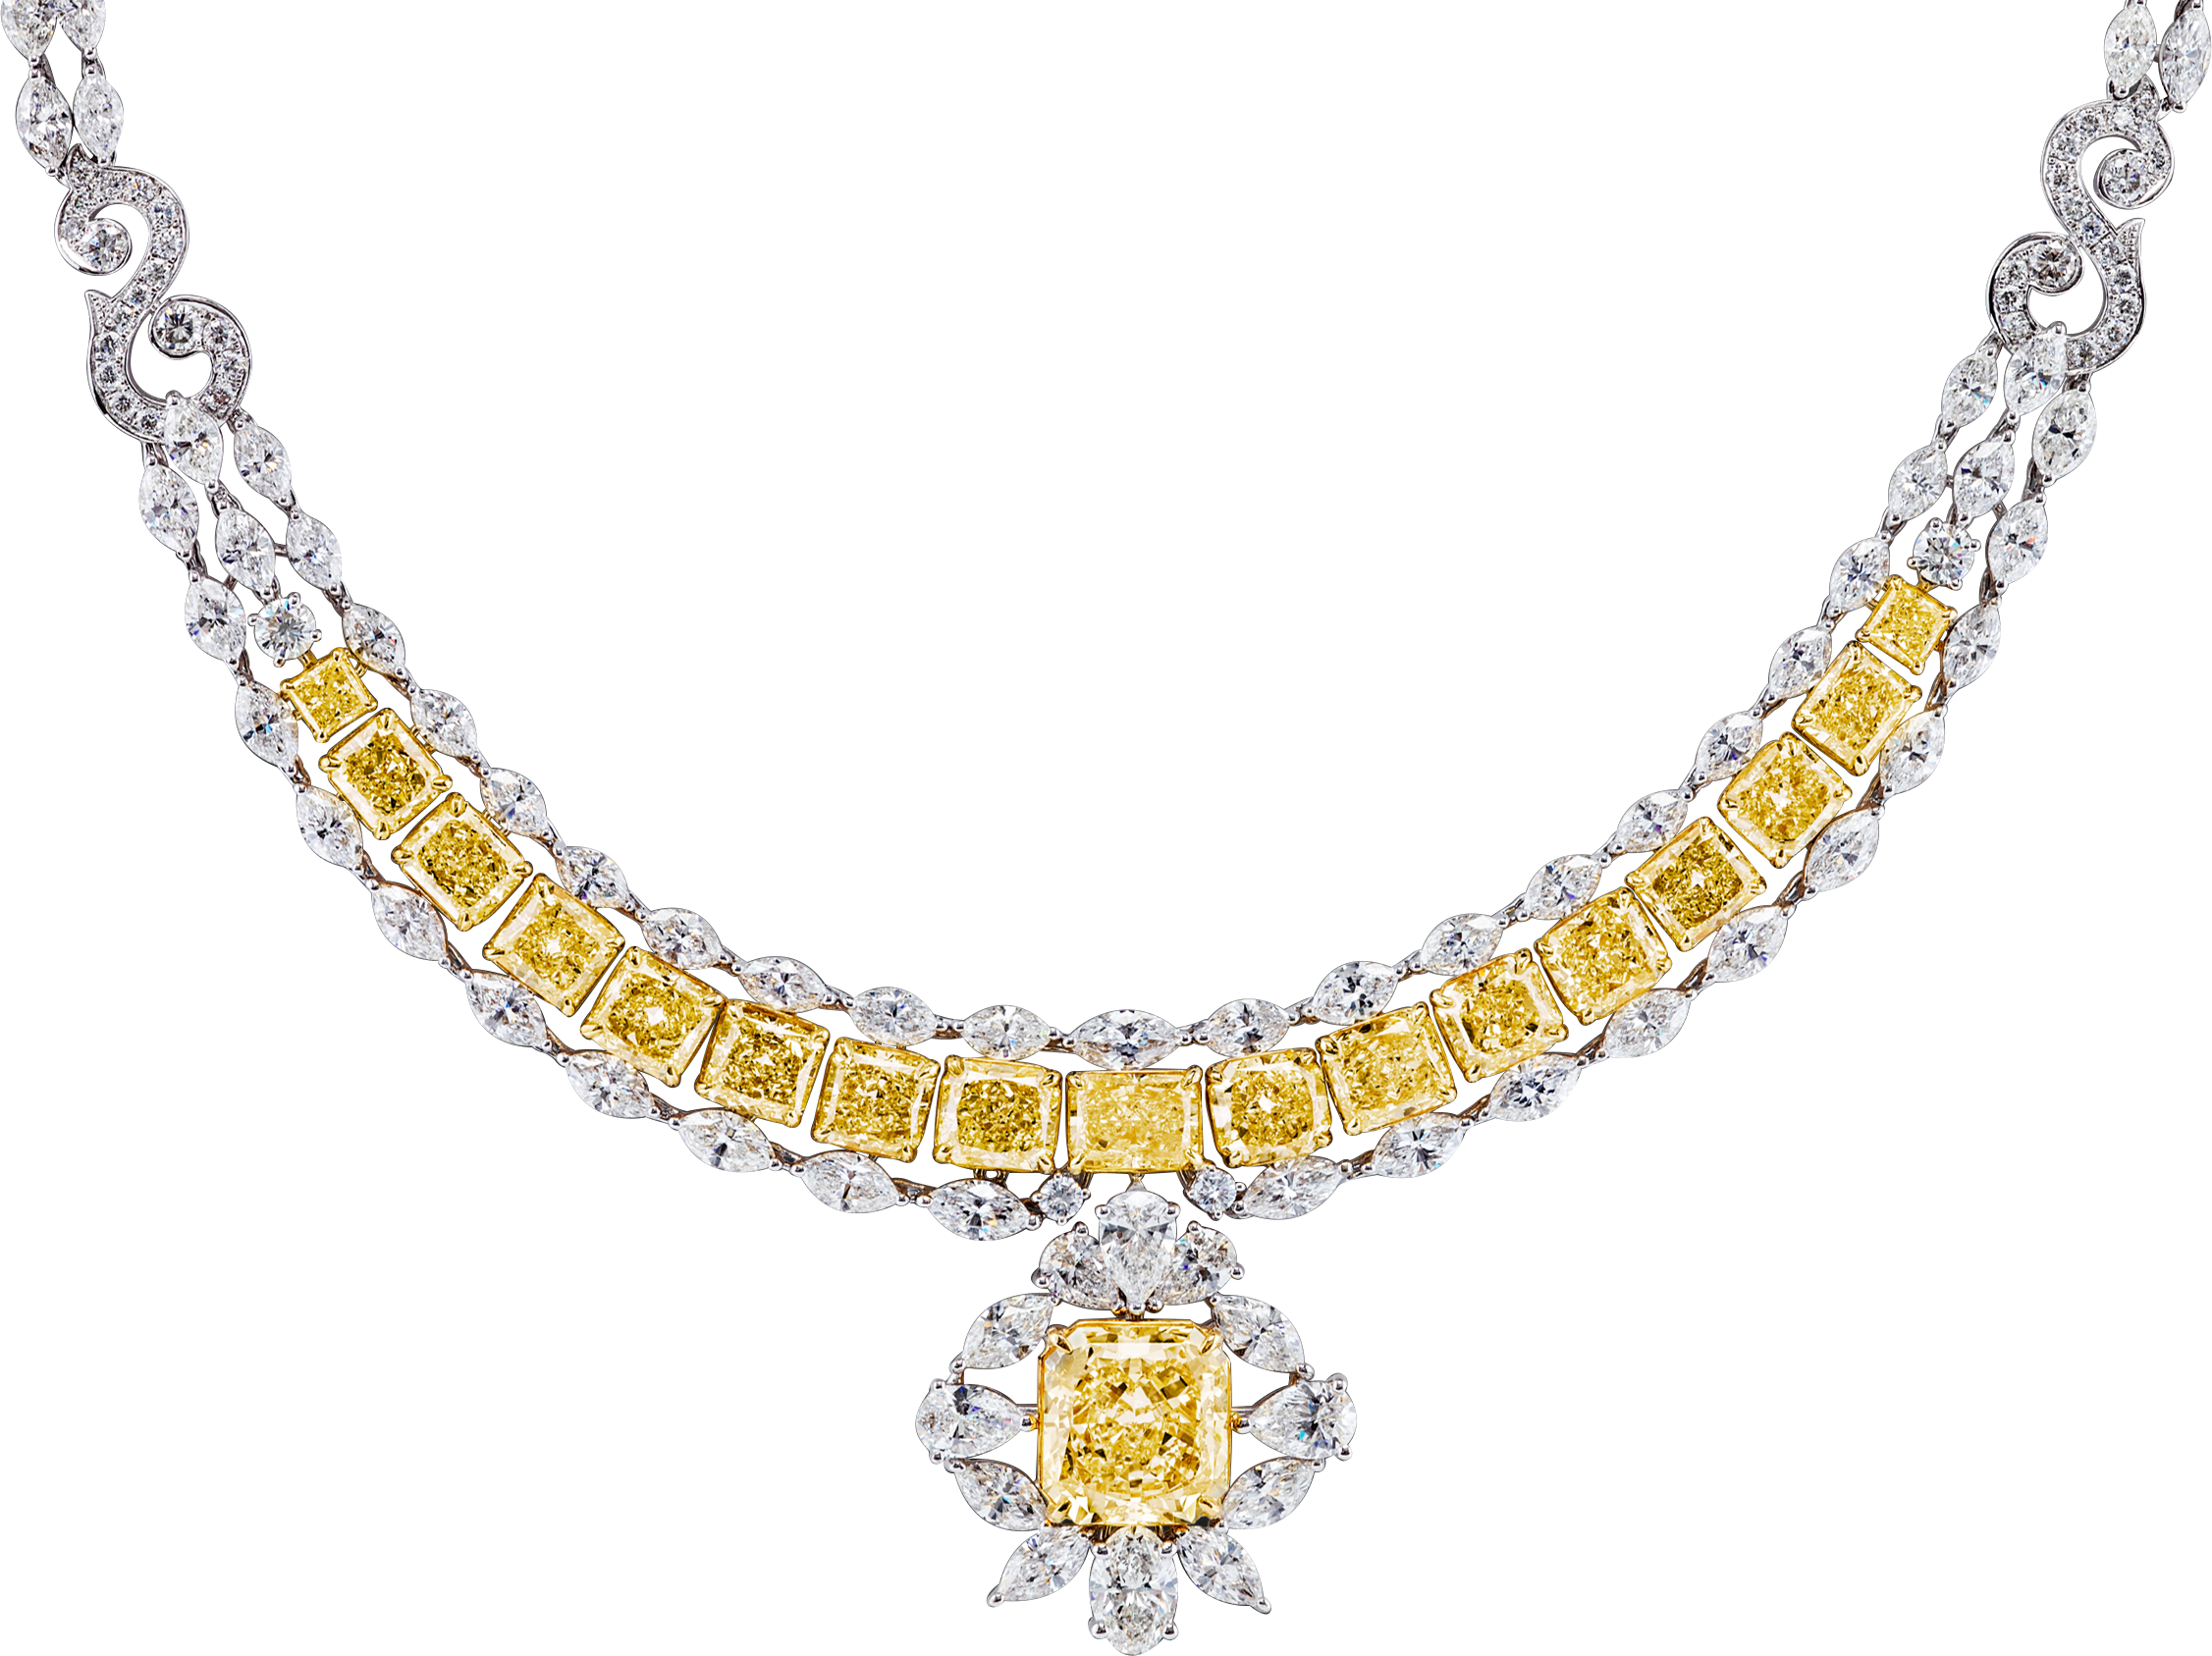 Extraordinary-GIA-Certified-50-Carat-Fancy-Yellow-Diamond-Necklace-in-18K-Gold-Necklace_d93493e4-a688-42a4-8953-745142bd1549.png